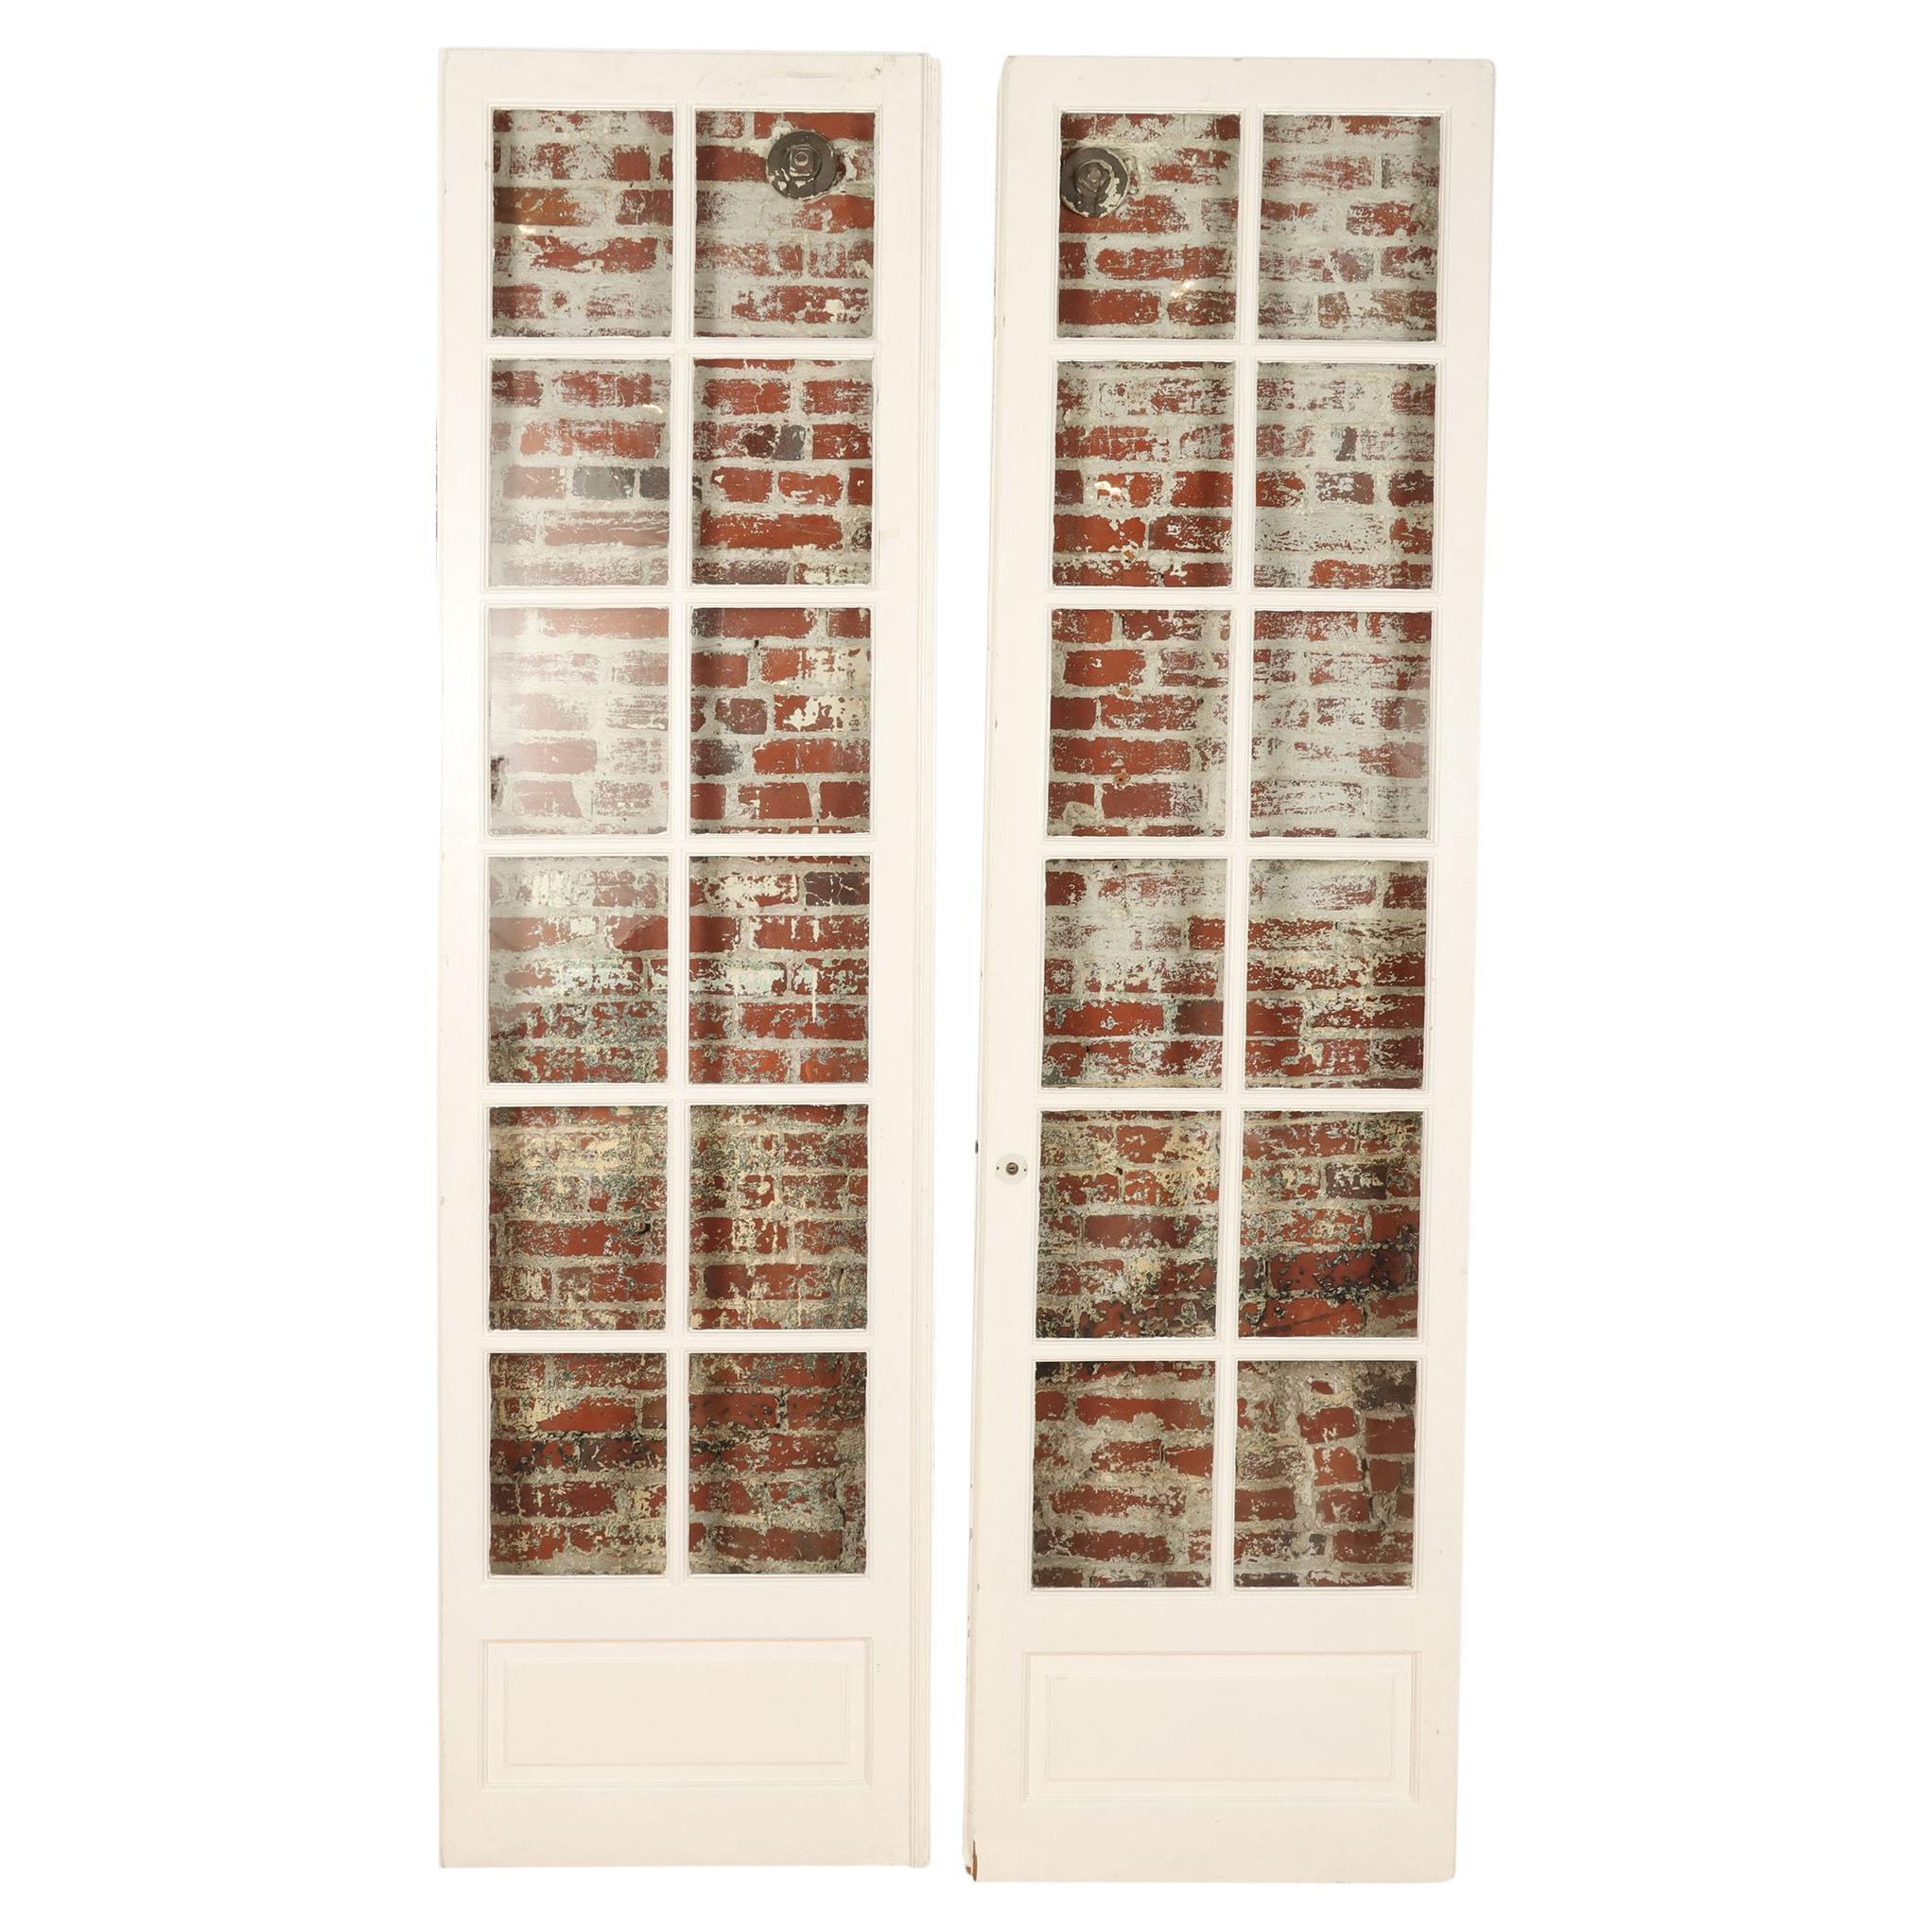 Pair of Painted French Doors, C 1900